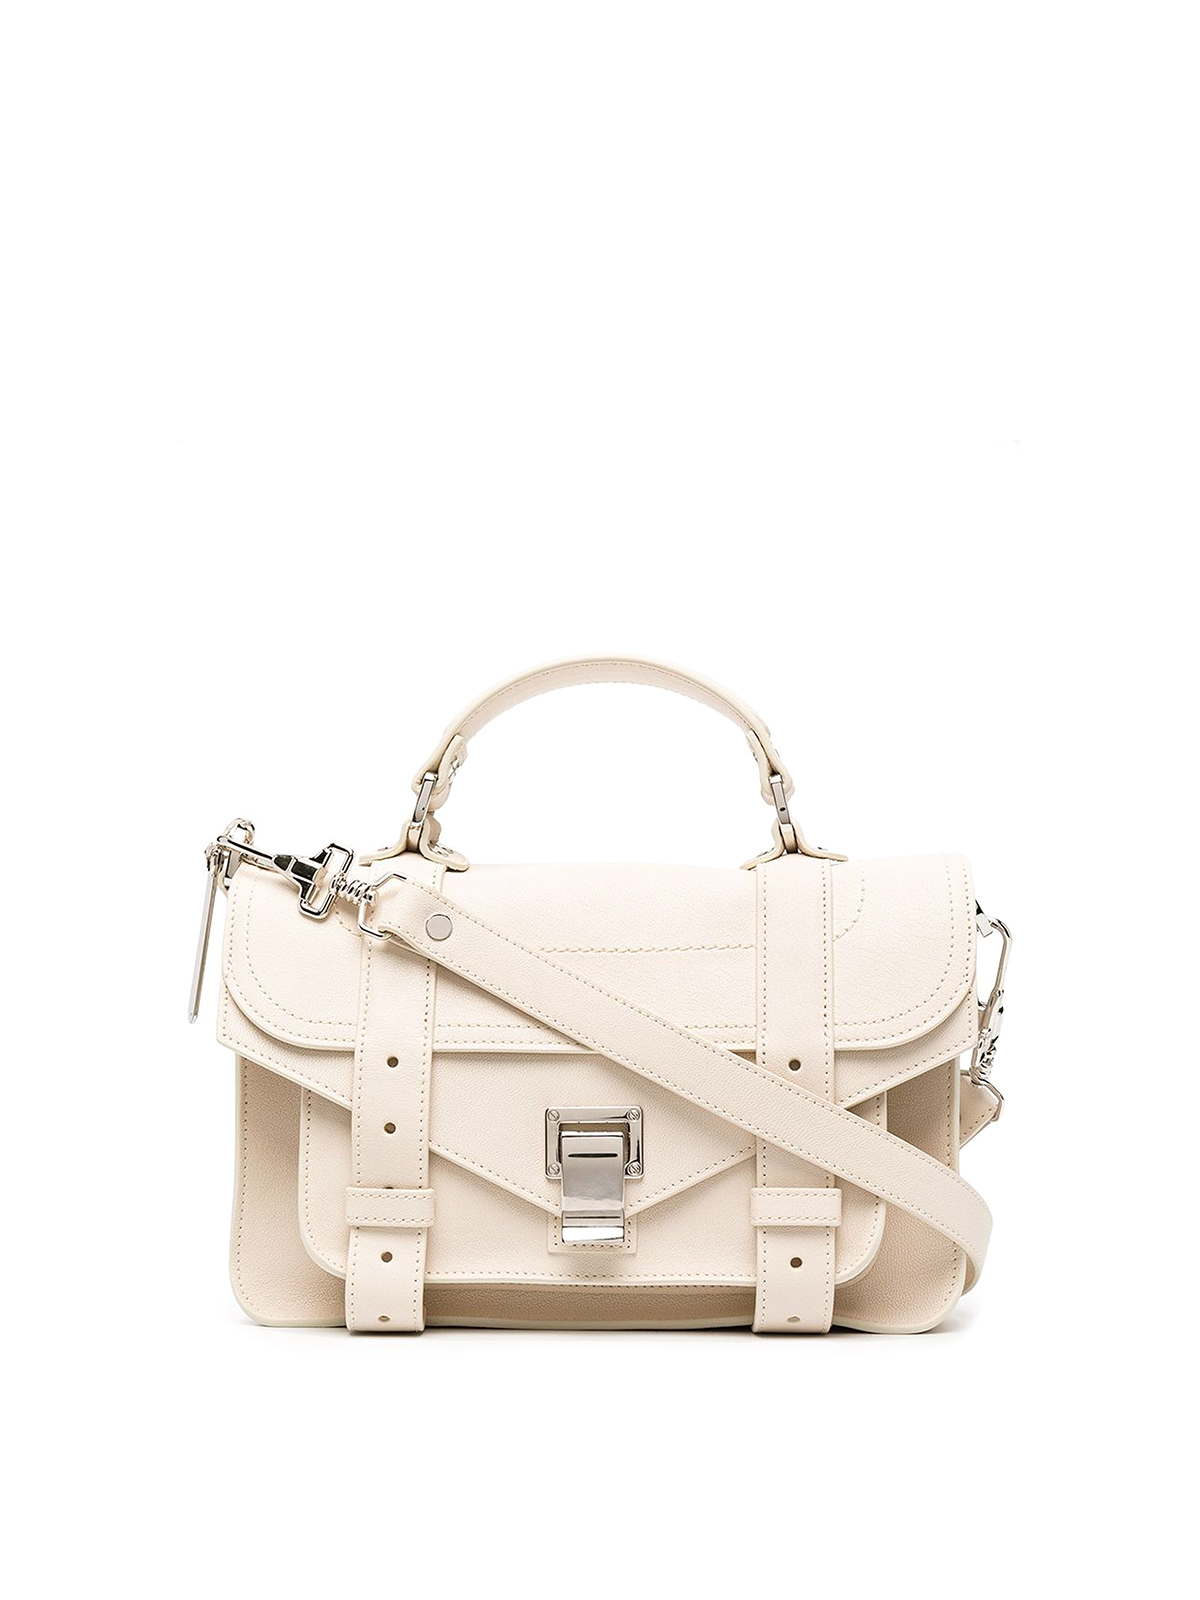 Proenza Schouler Leather Flap Front Bag With Metal Tab Closure In White